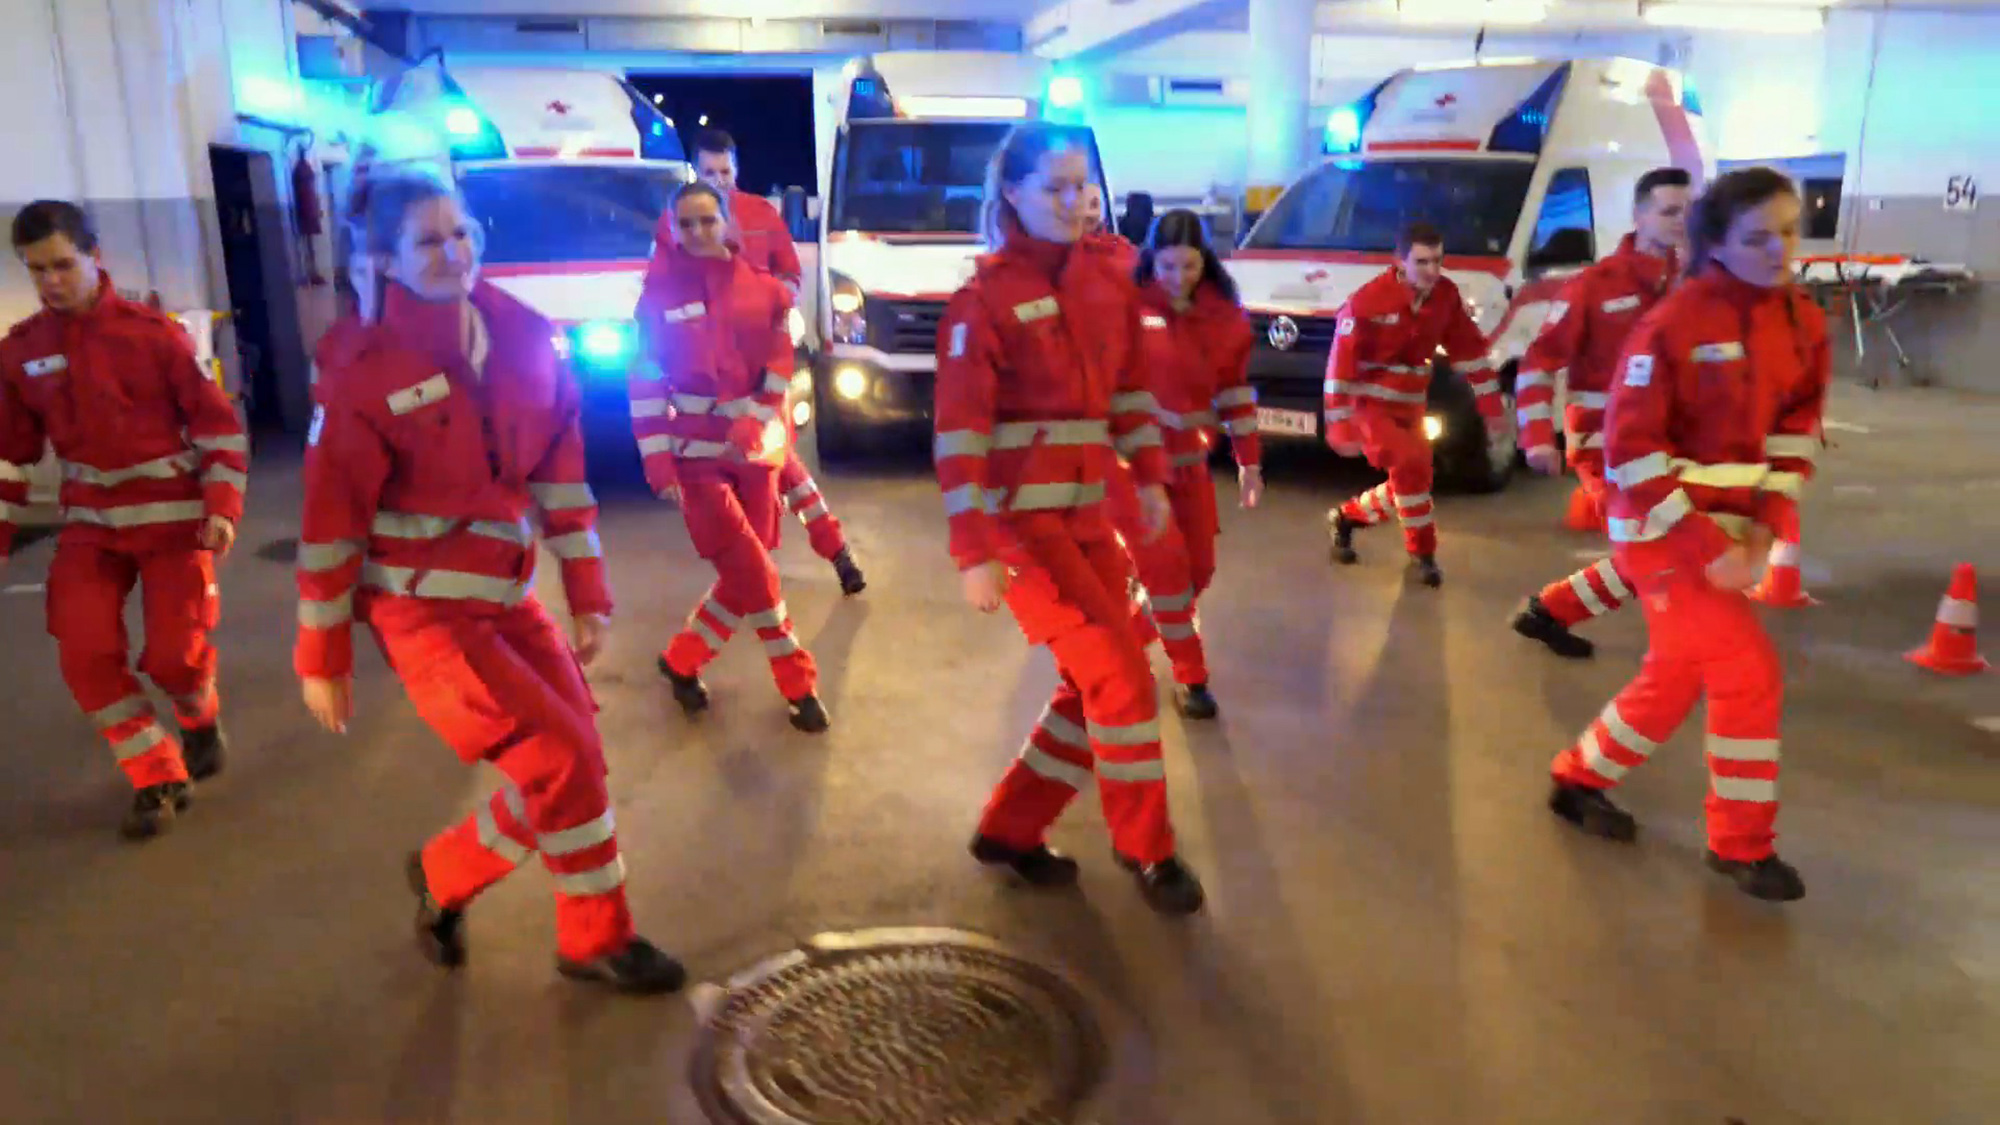 Read more about the article Red Cross Medics In Tik Tok Git Up Dance Challenge